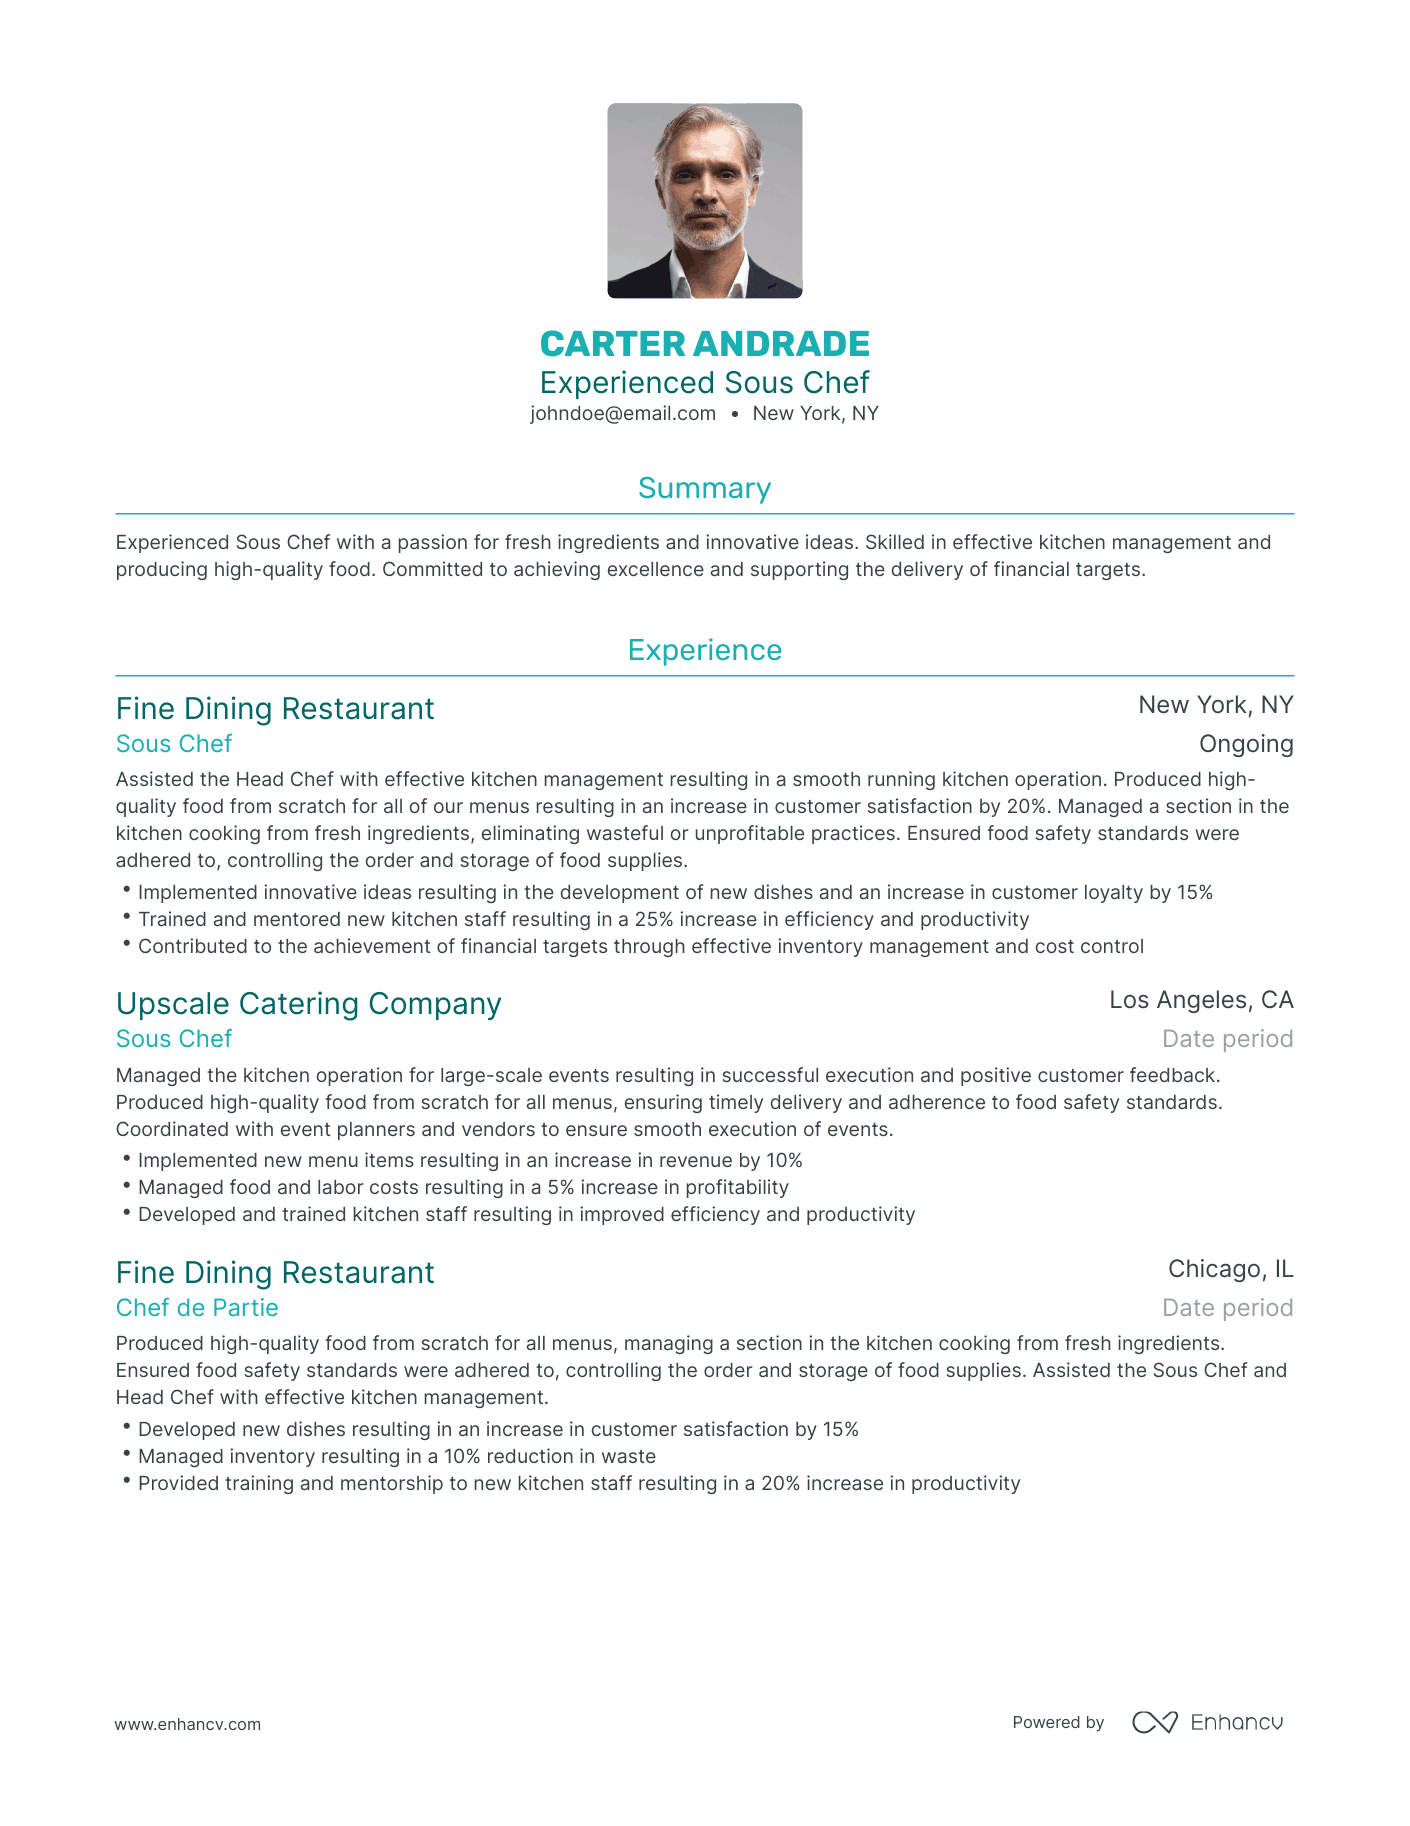 Traditional Sous Chef Resume Template